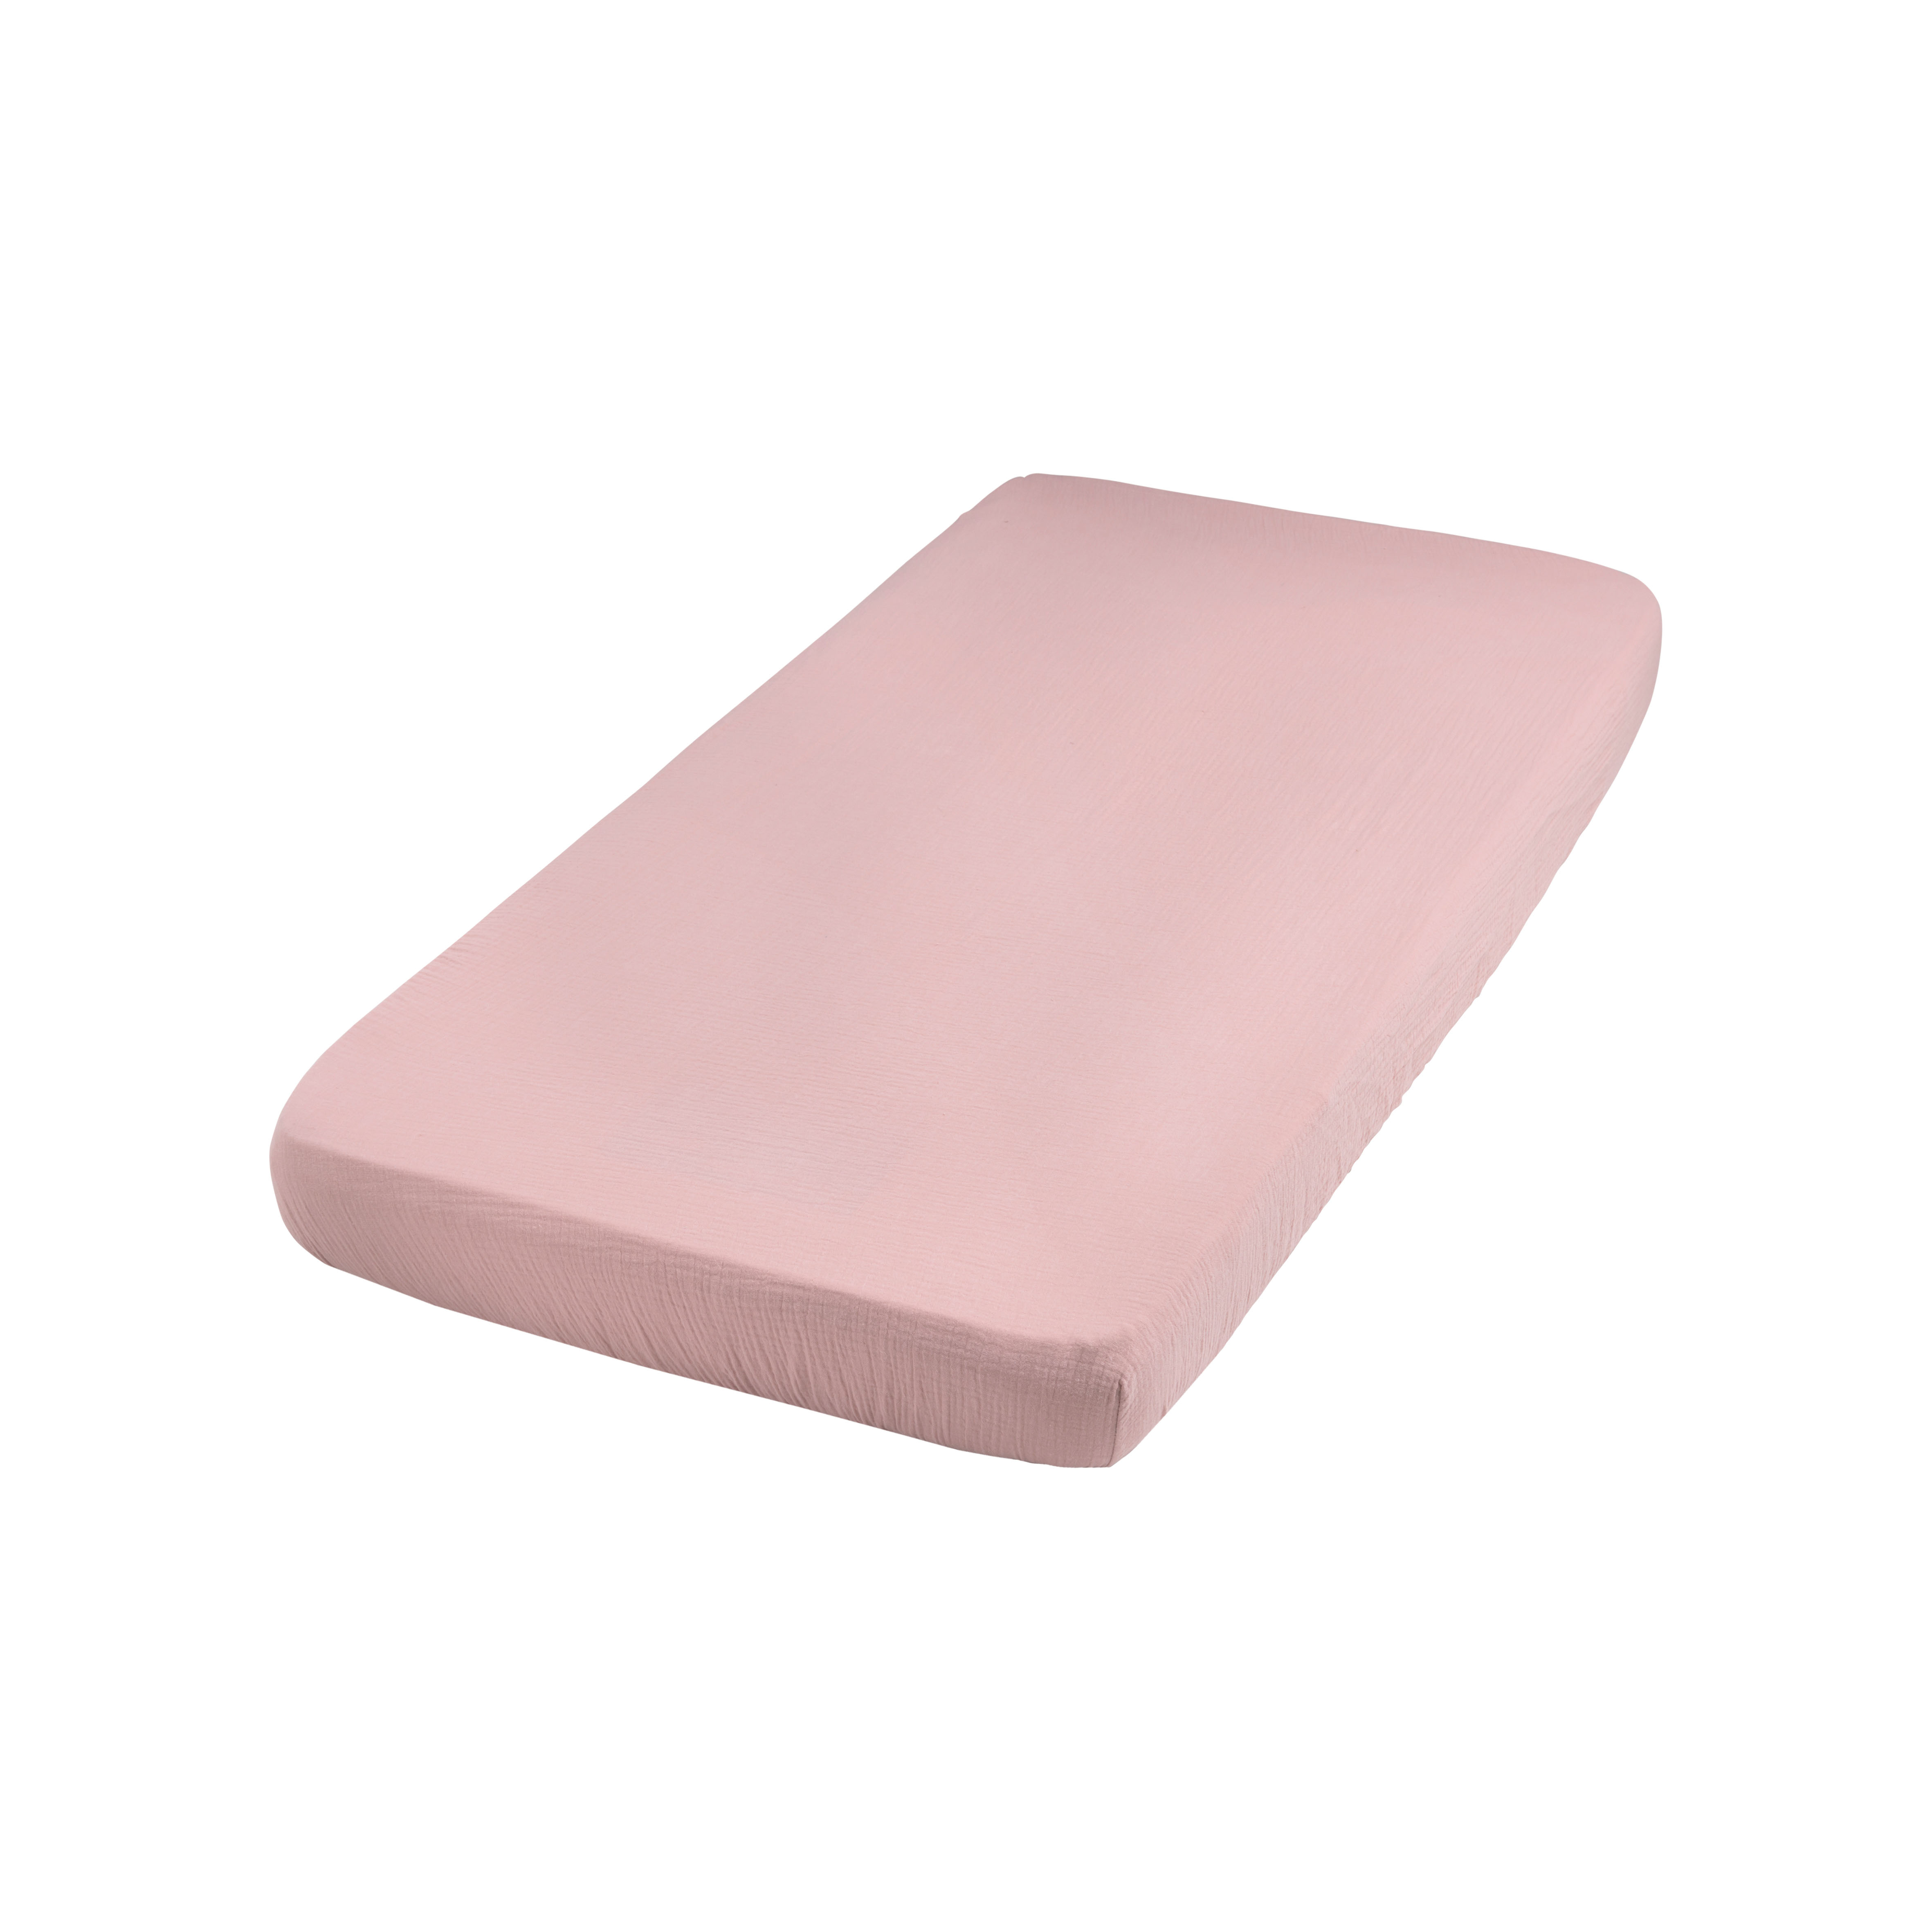 Fitted sheet Breeze old pink - 40x80